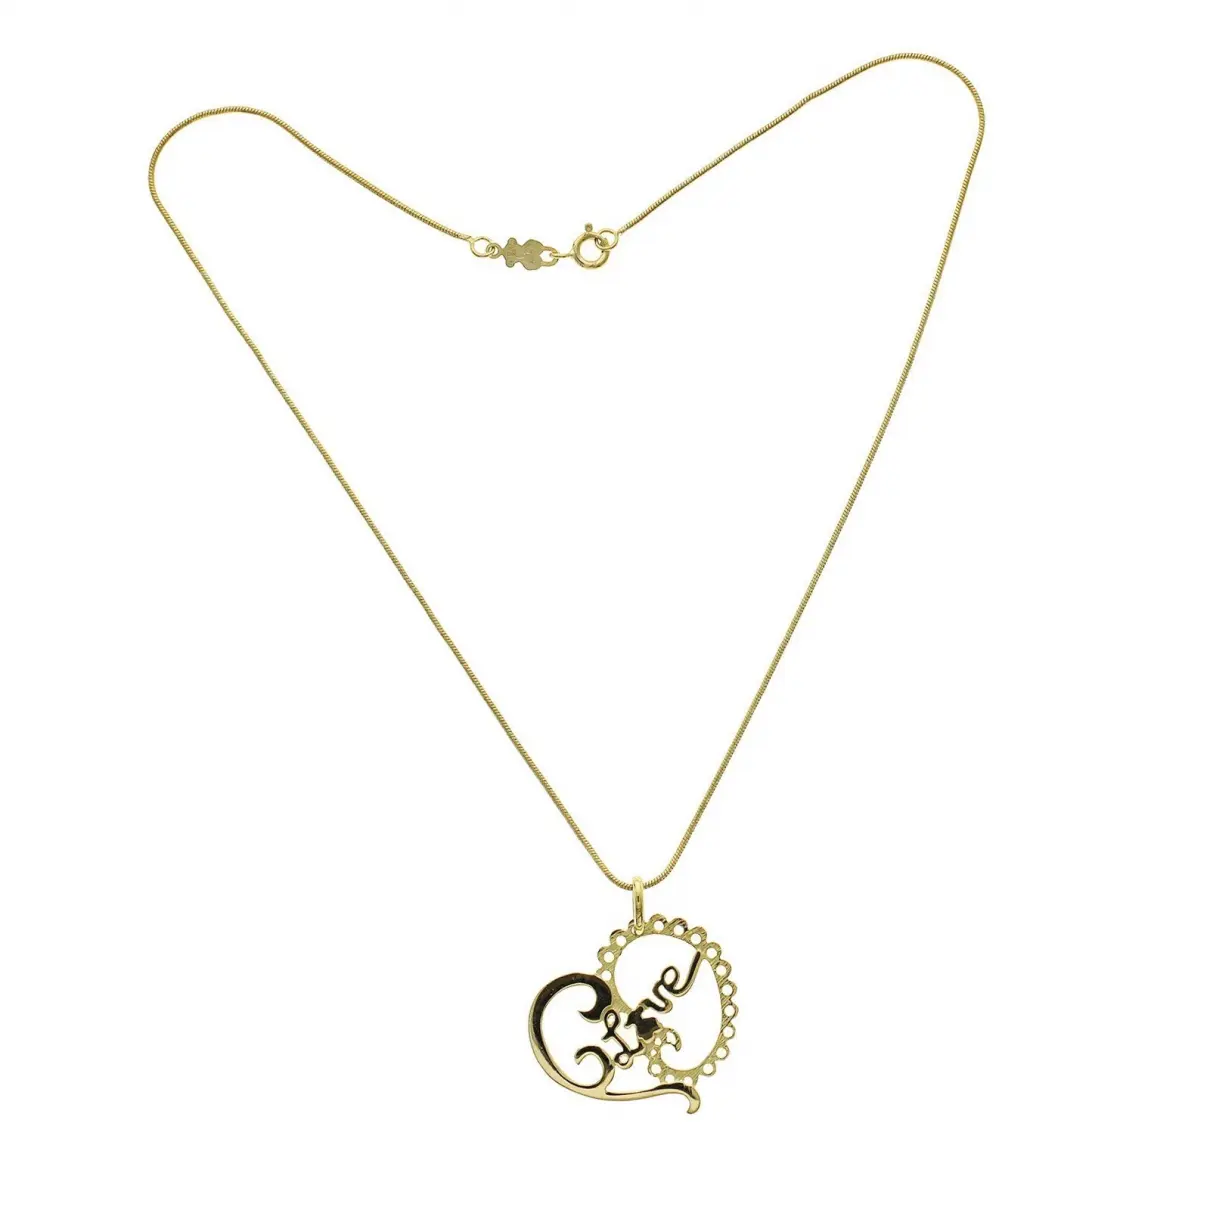 Buy TOUS Yellow gold necklace online